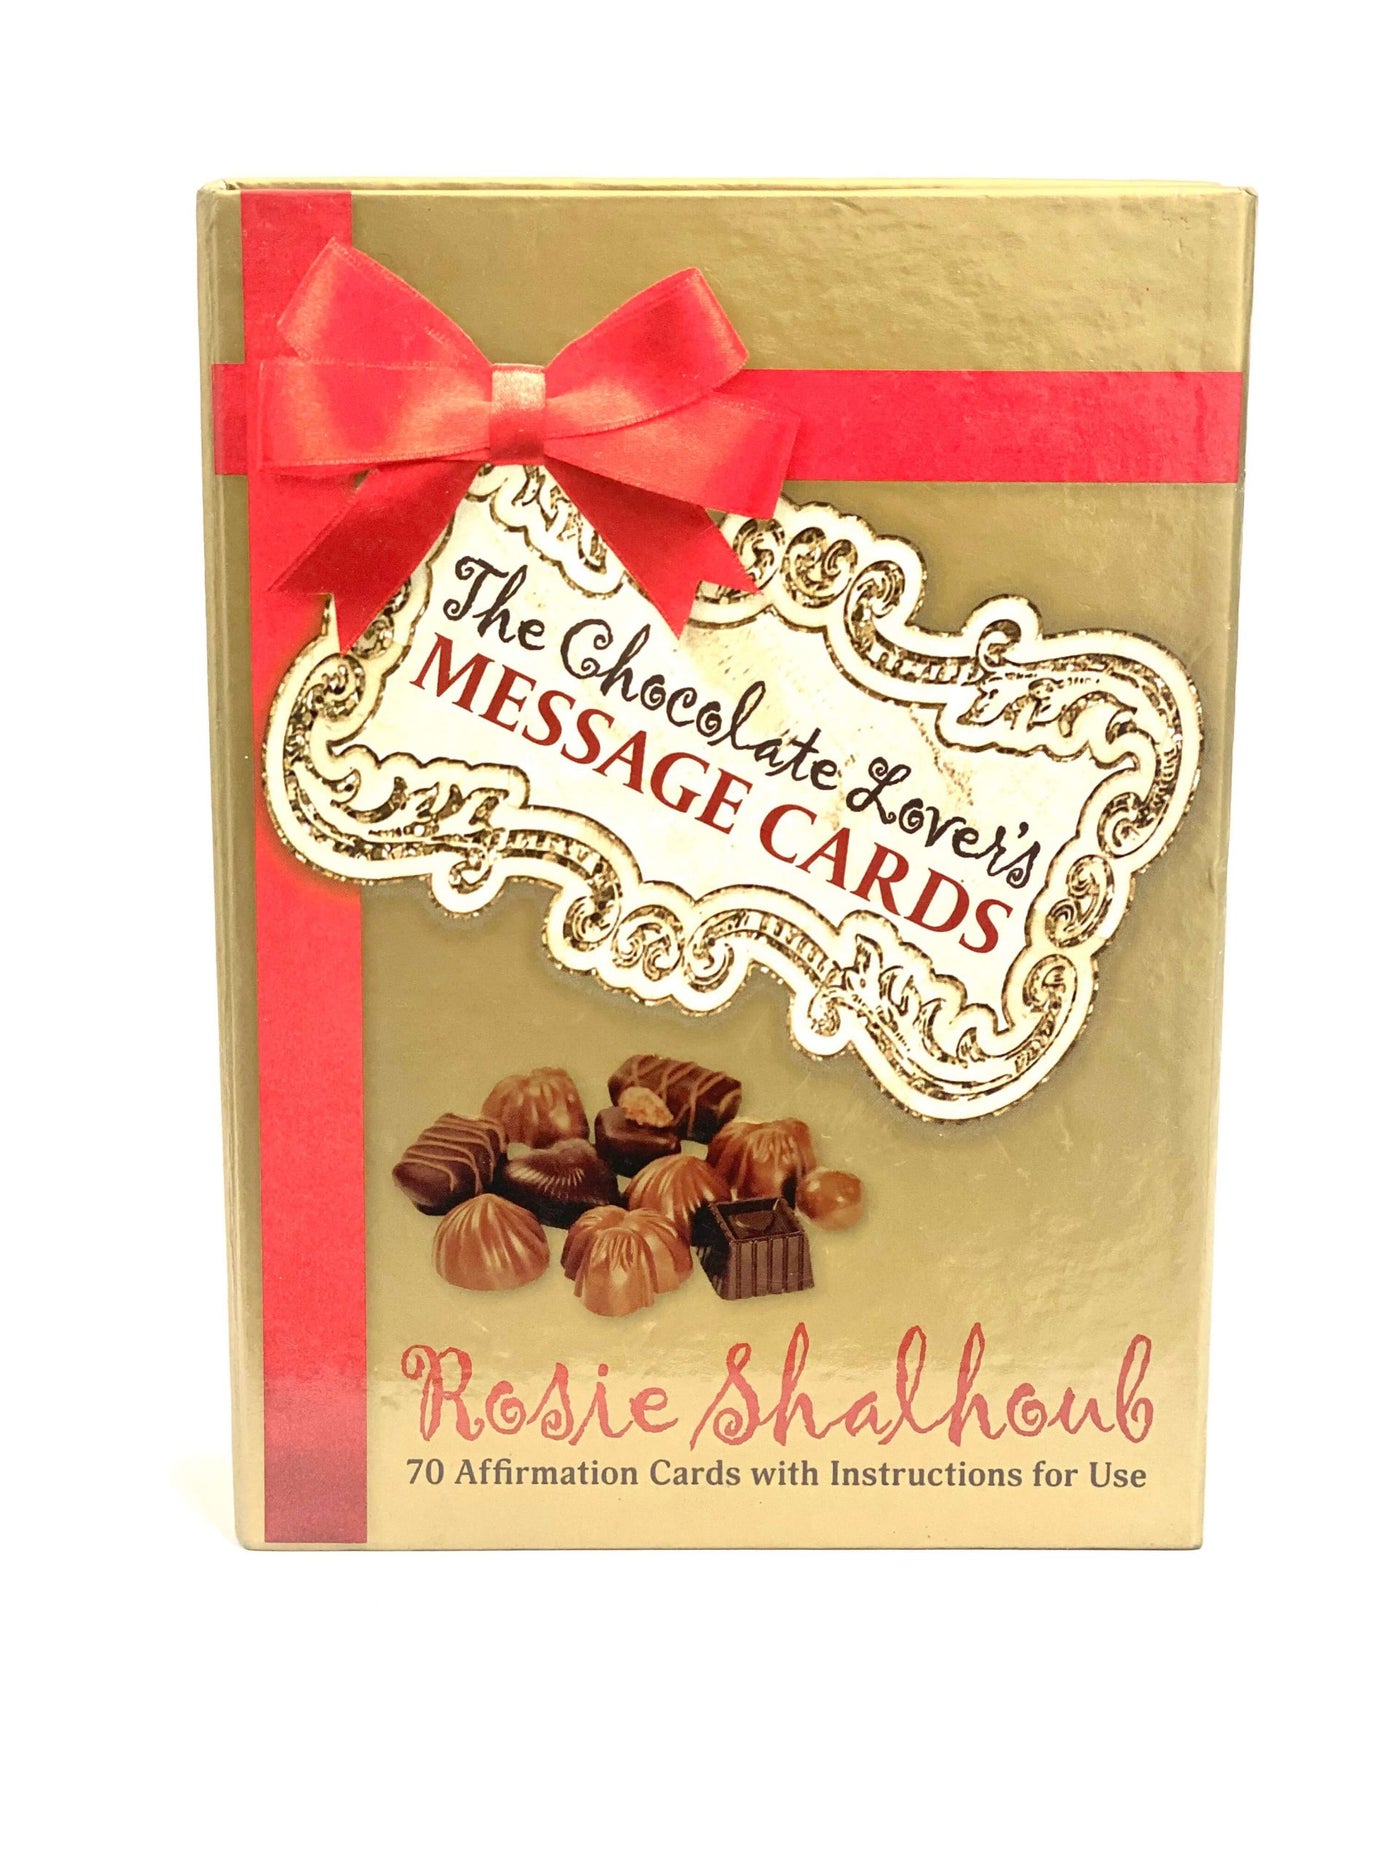 The Chocolate Lover's Message Cards